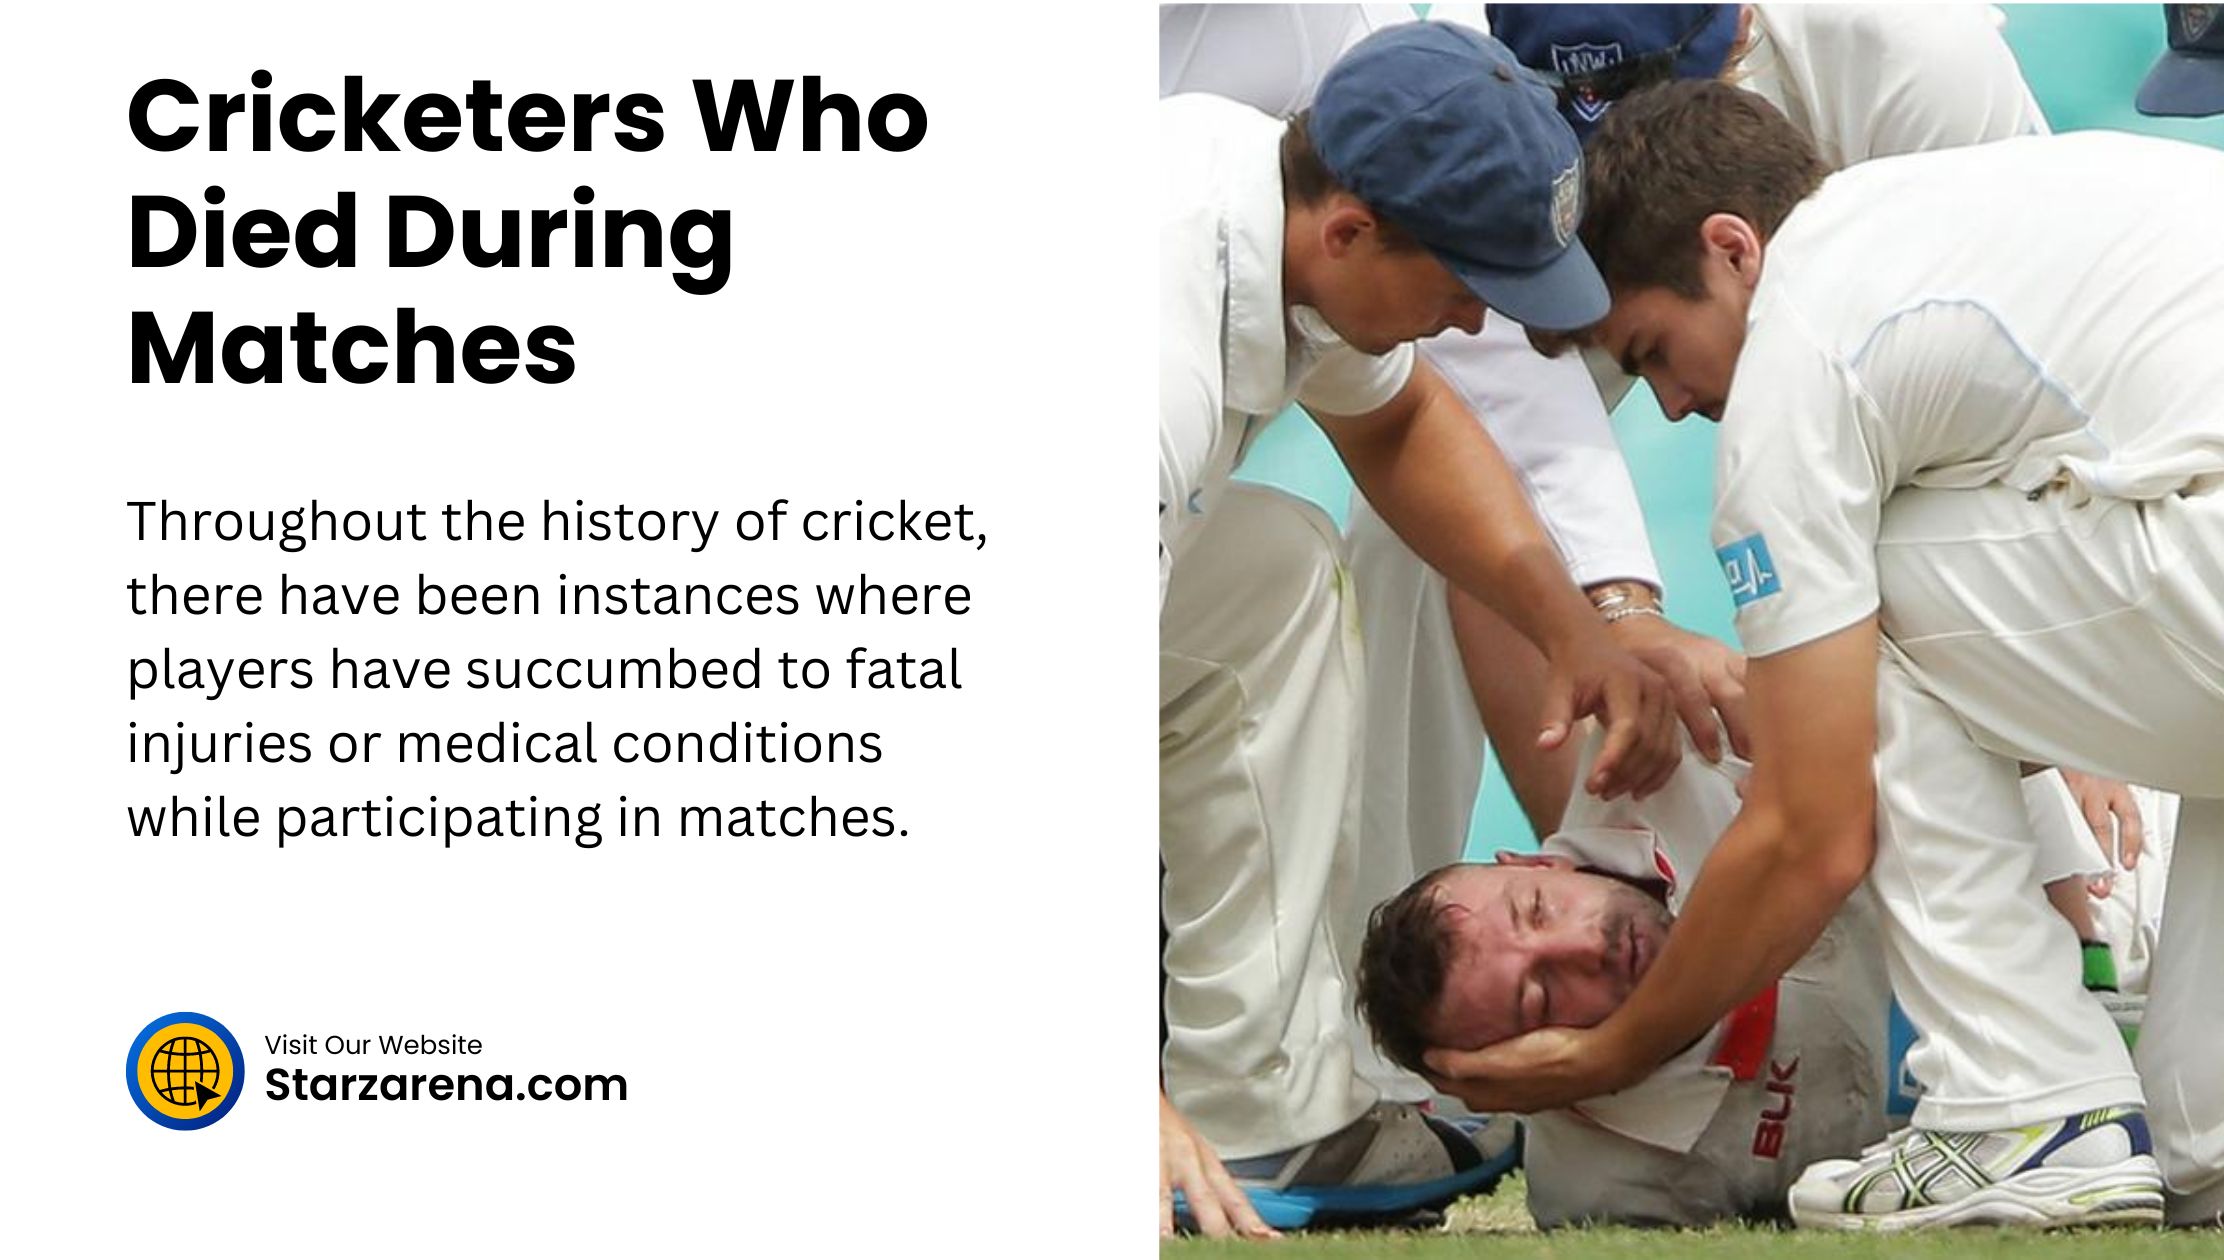 Cricketers Who Died During Matches